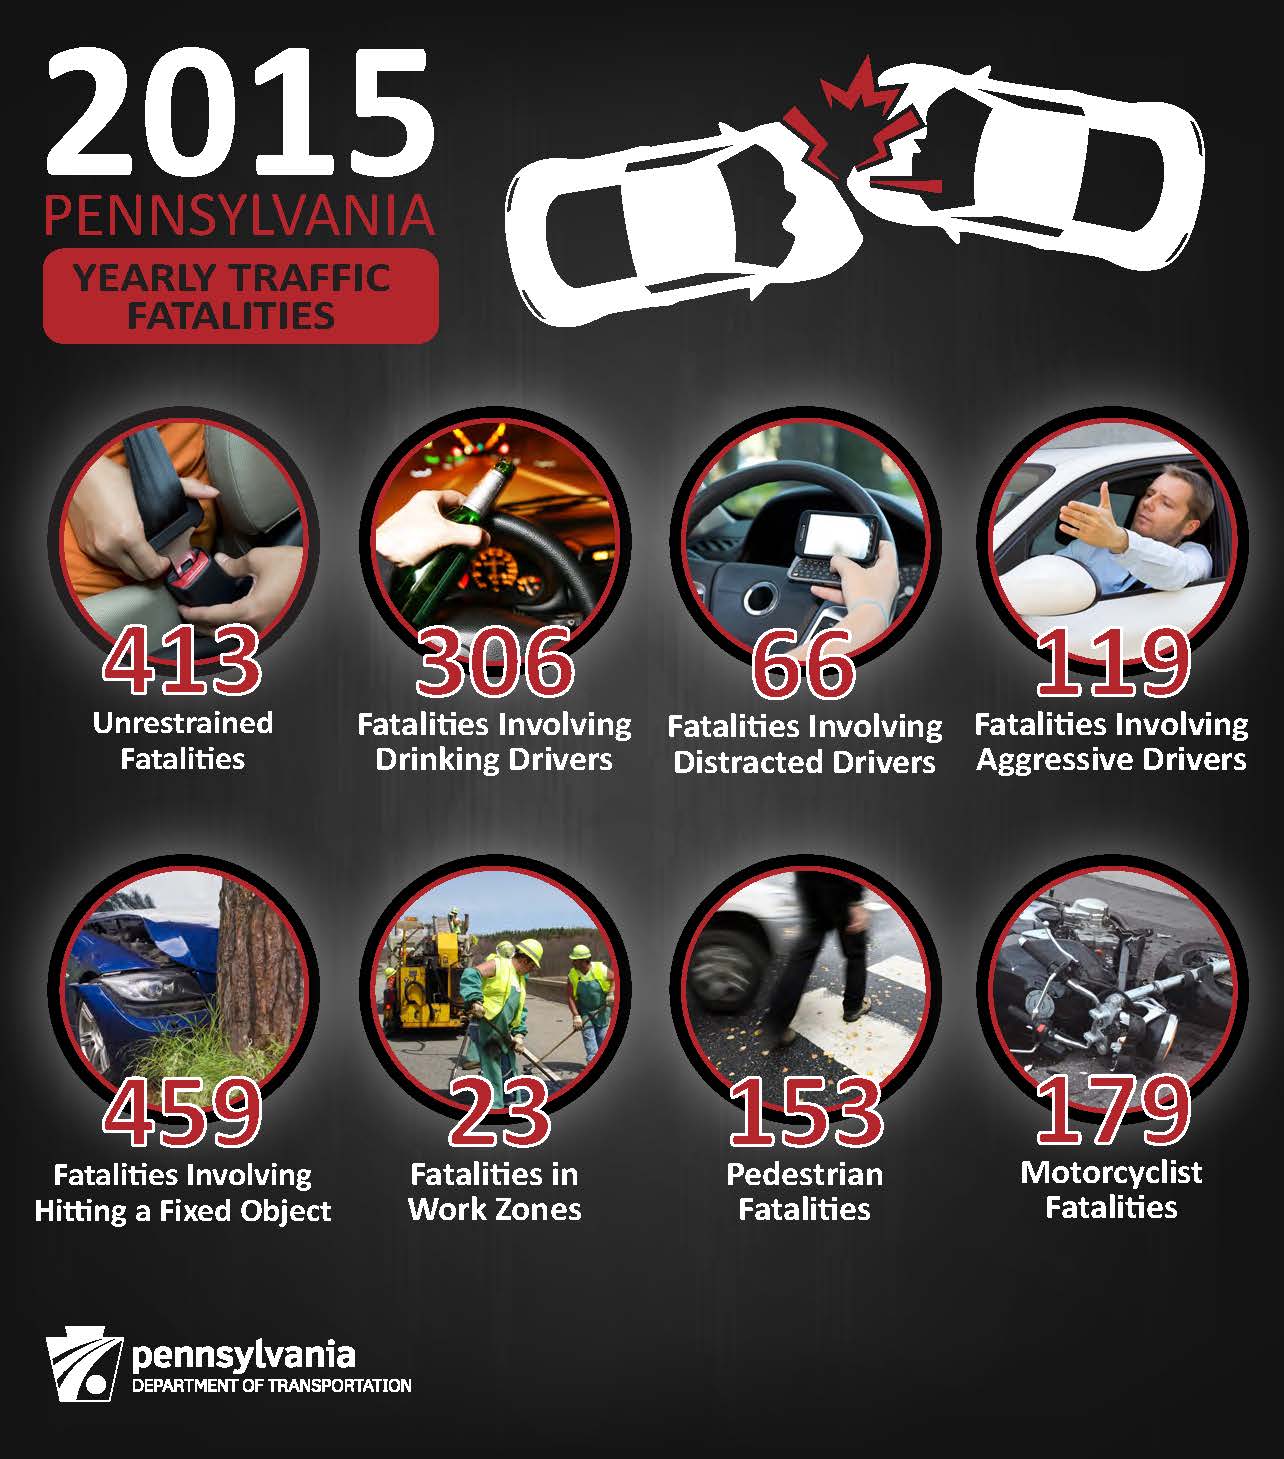 2015 yearly fatalities infographic